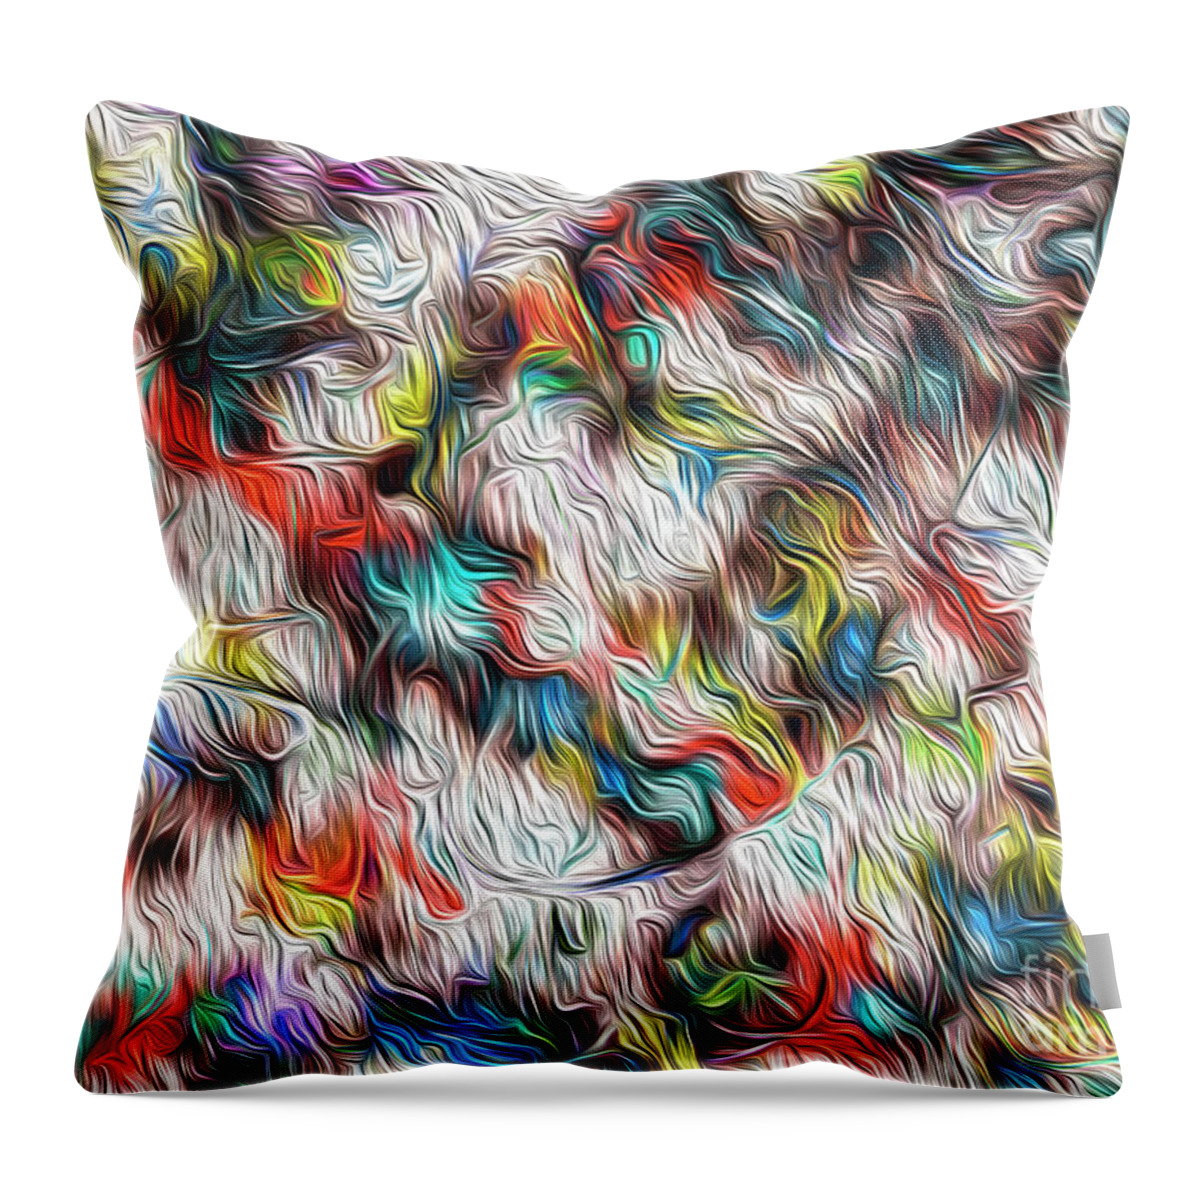 Transition Throw Pillow featuring the mixed media Winter's Transition by Toni Somes